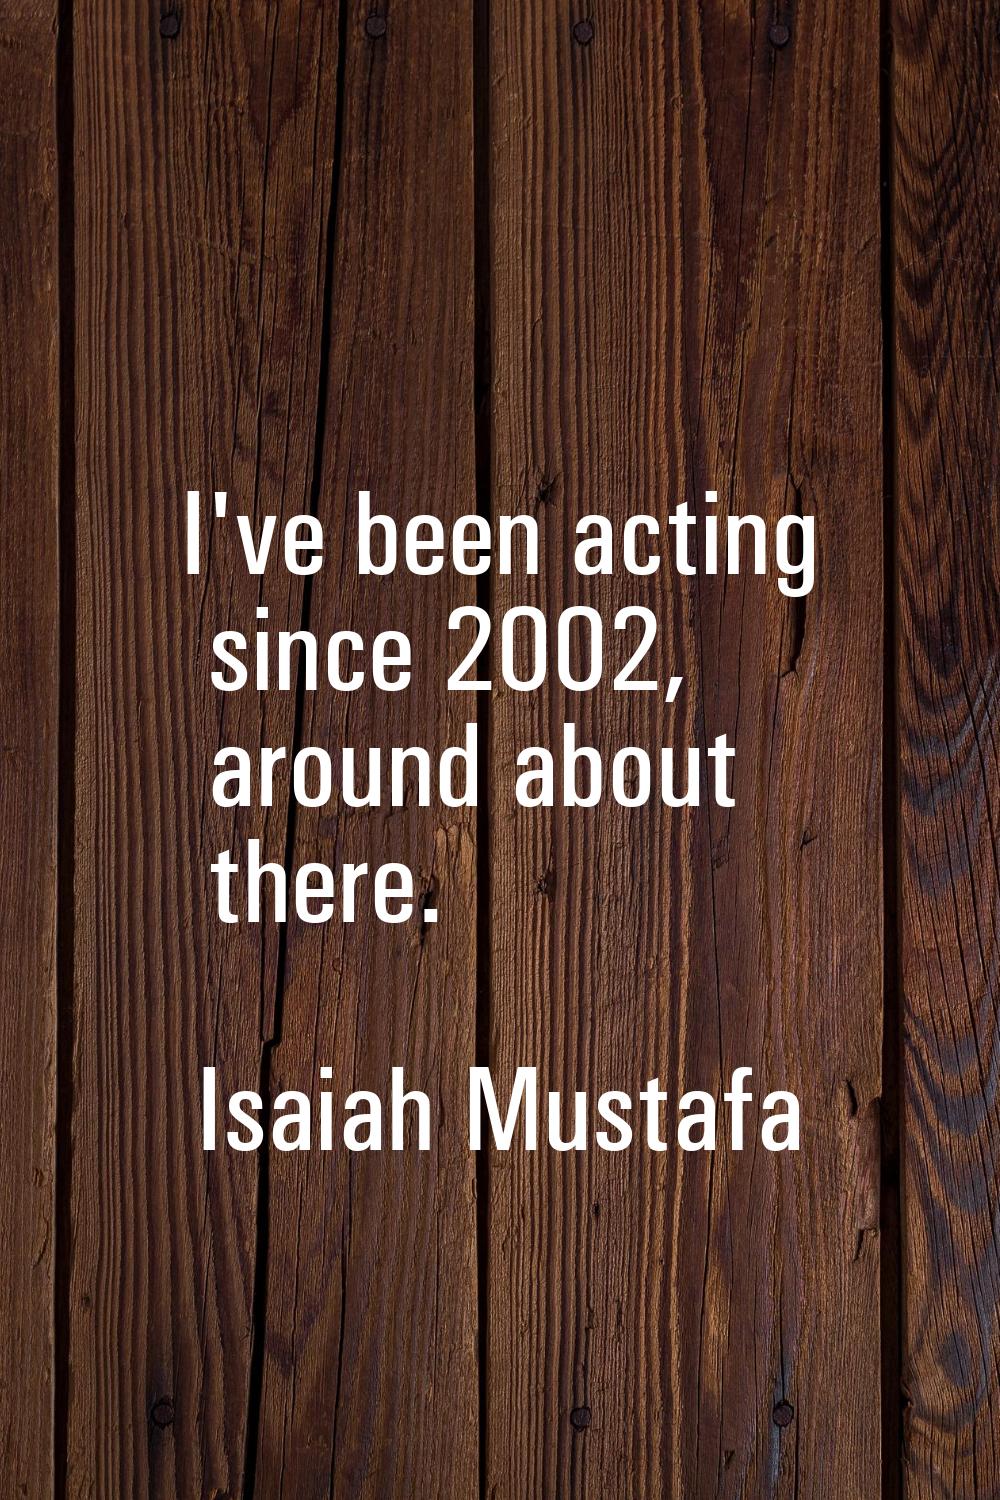 I've been acting since 2002, around about there.